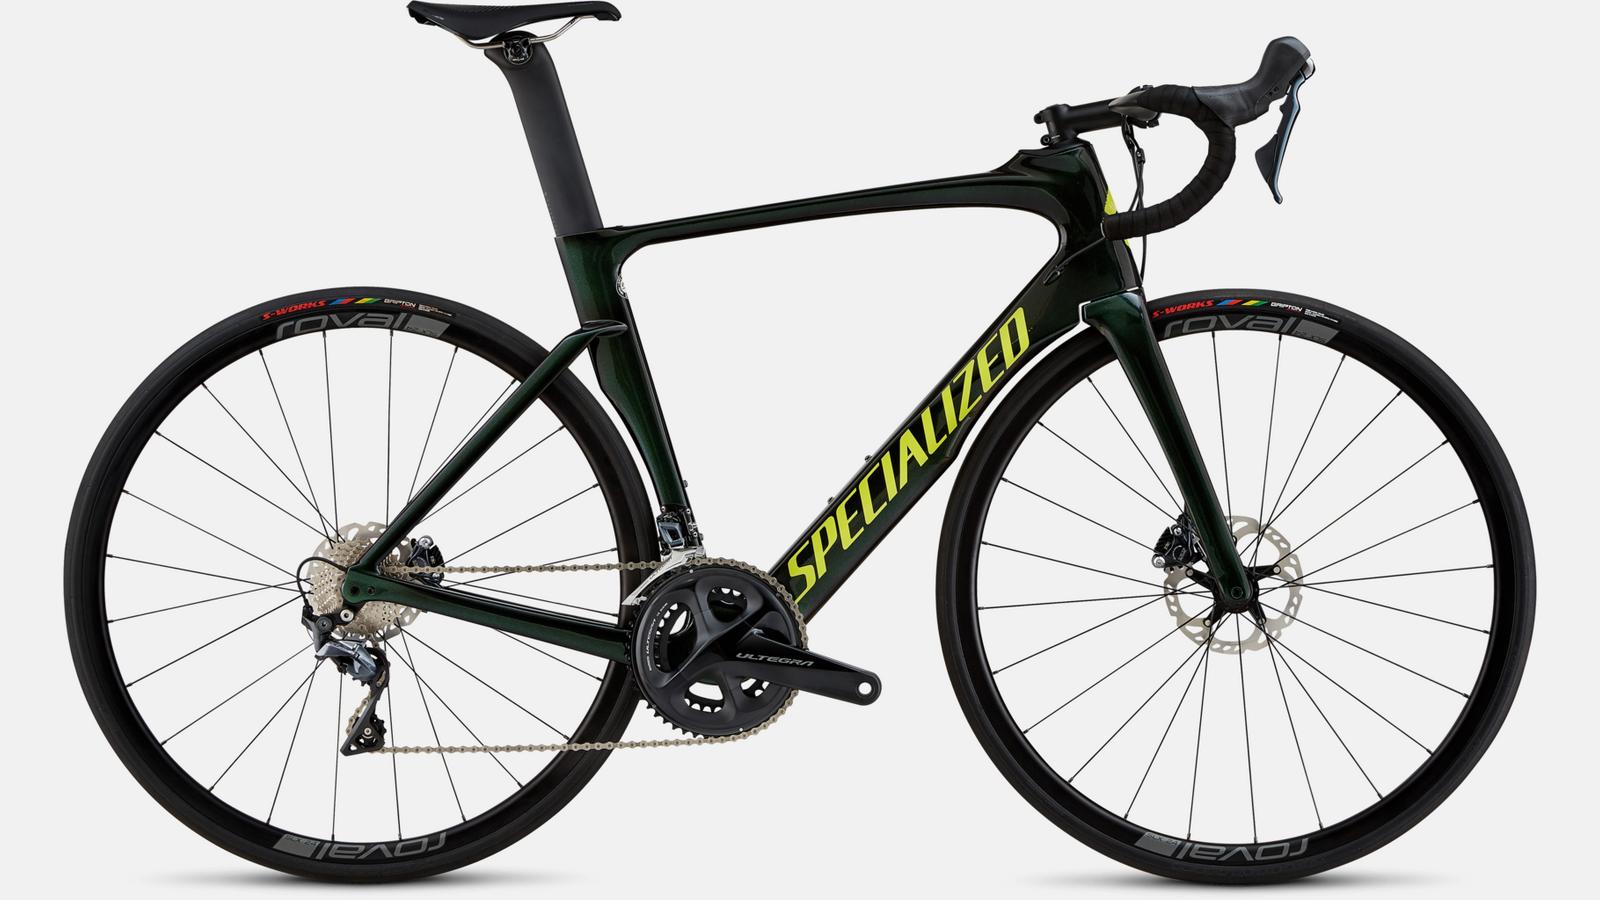 Paint for 2018 Specialized Venge Expert Disc - Gloss Tarmac Black